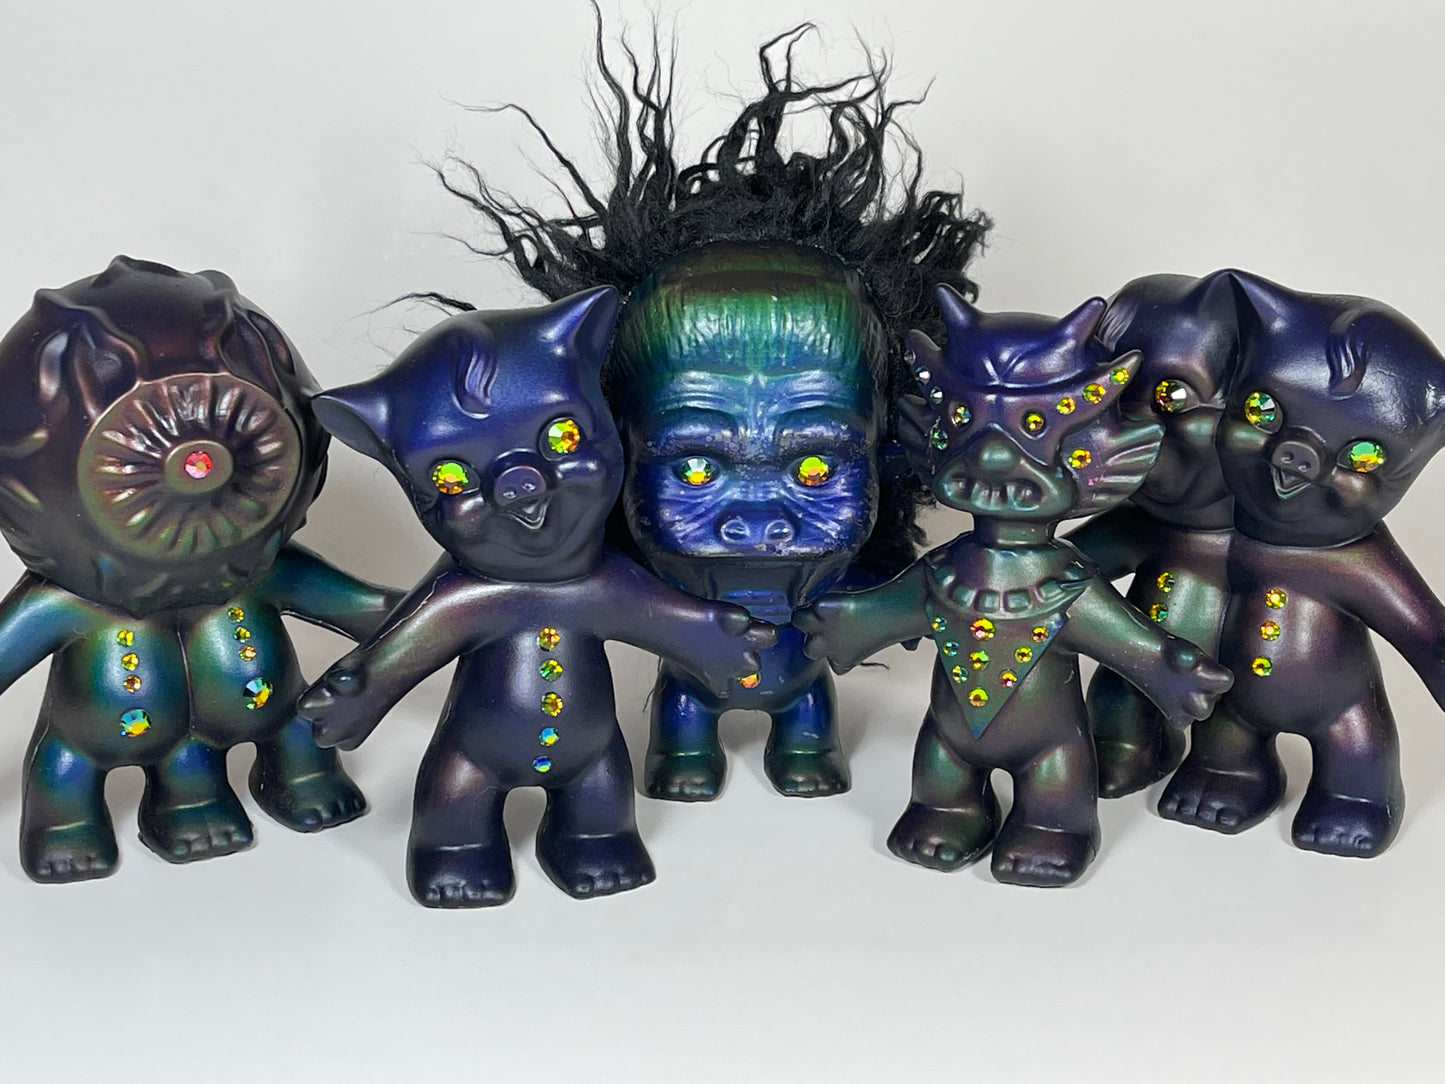 Liquid Crystal Trolls (discounted because the paint bubbled up overnight)